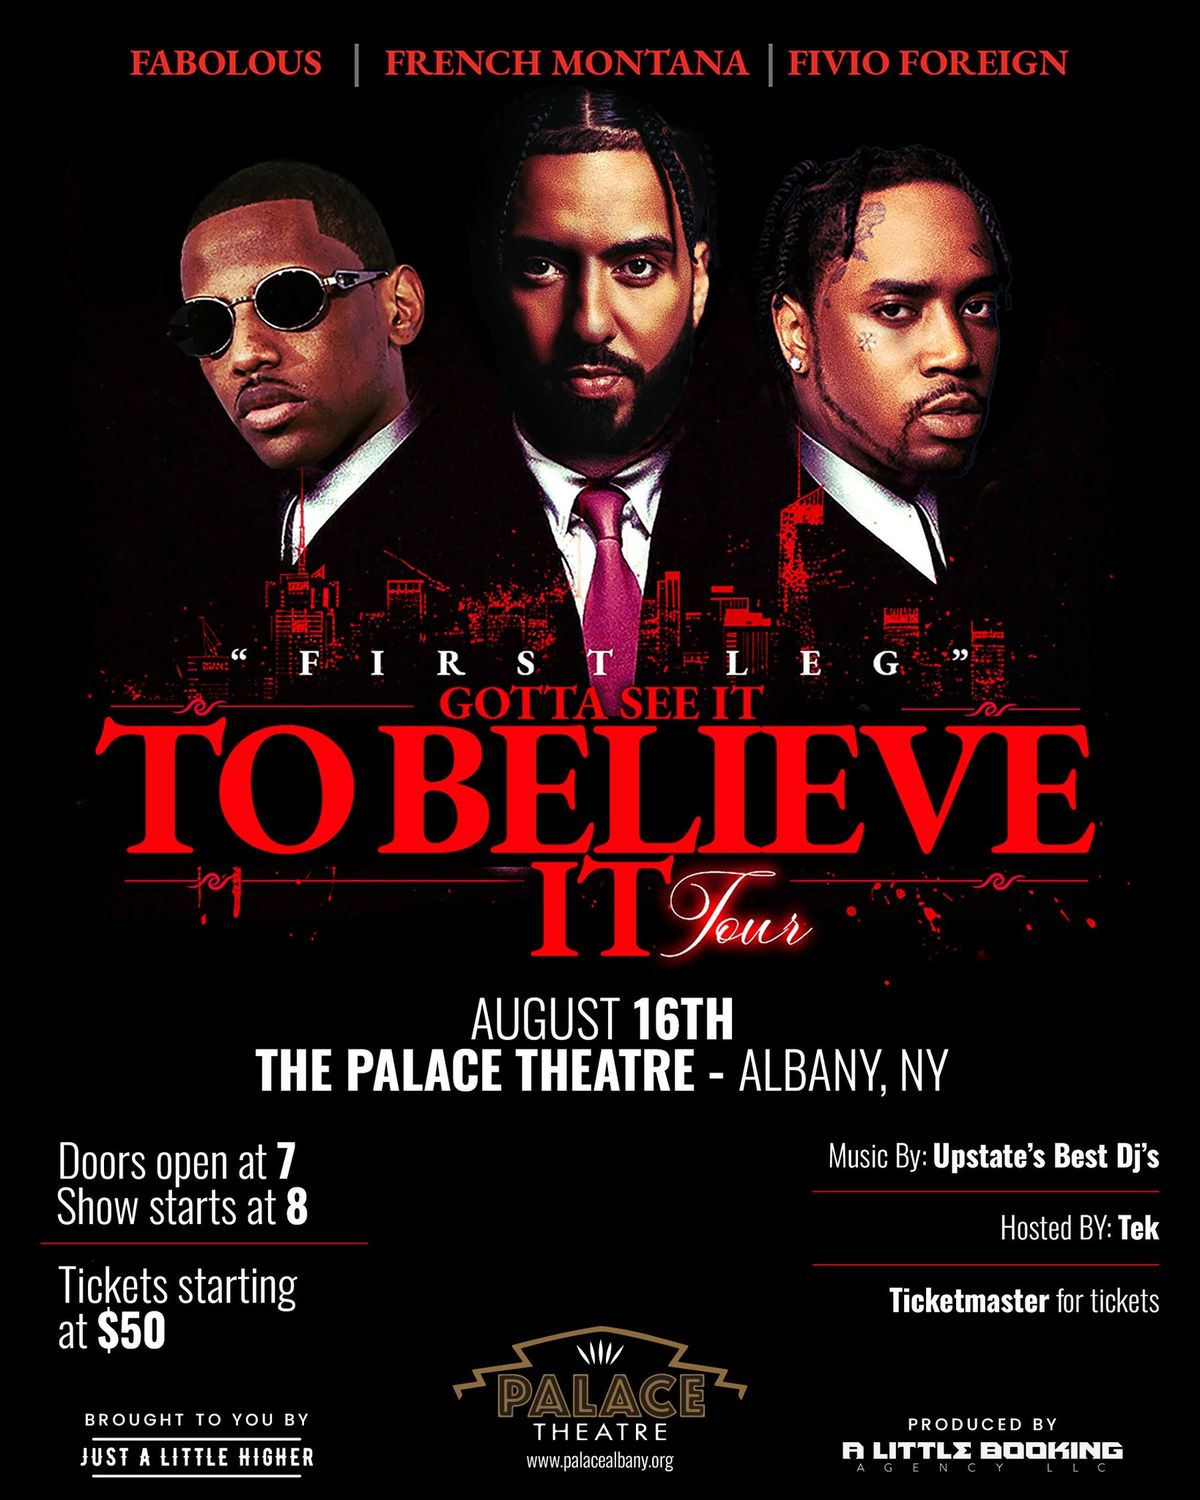 Gotta See it to Believe it: French Montana, Fabolous, & Fivio Foreign